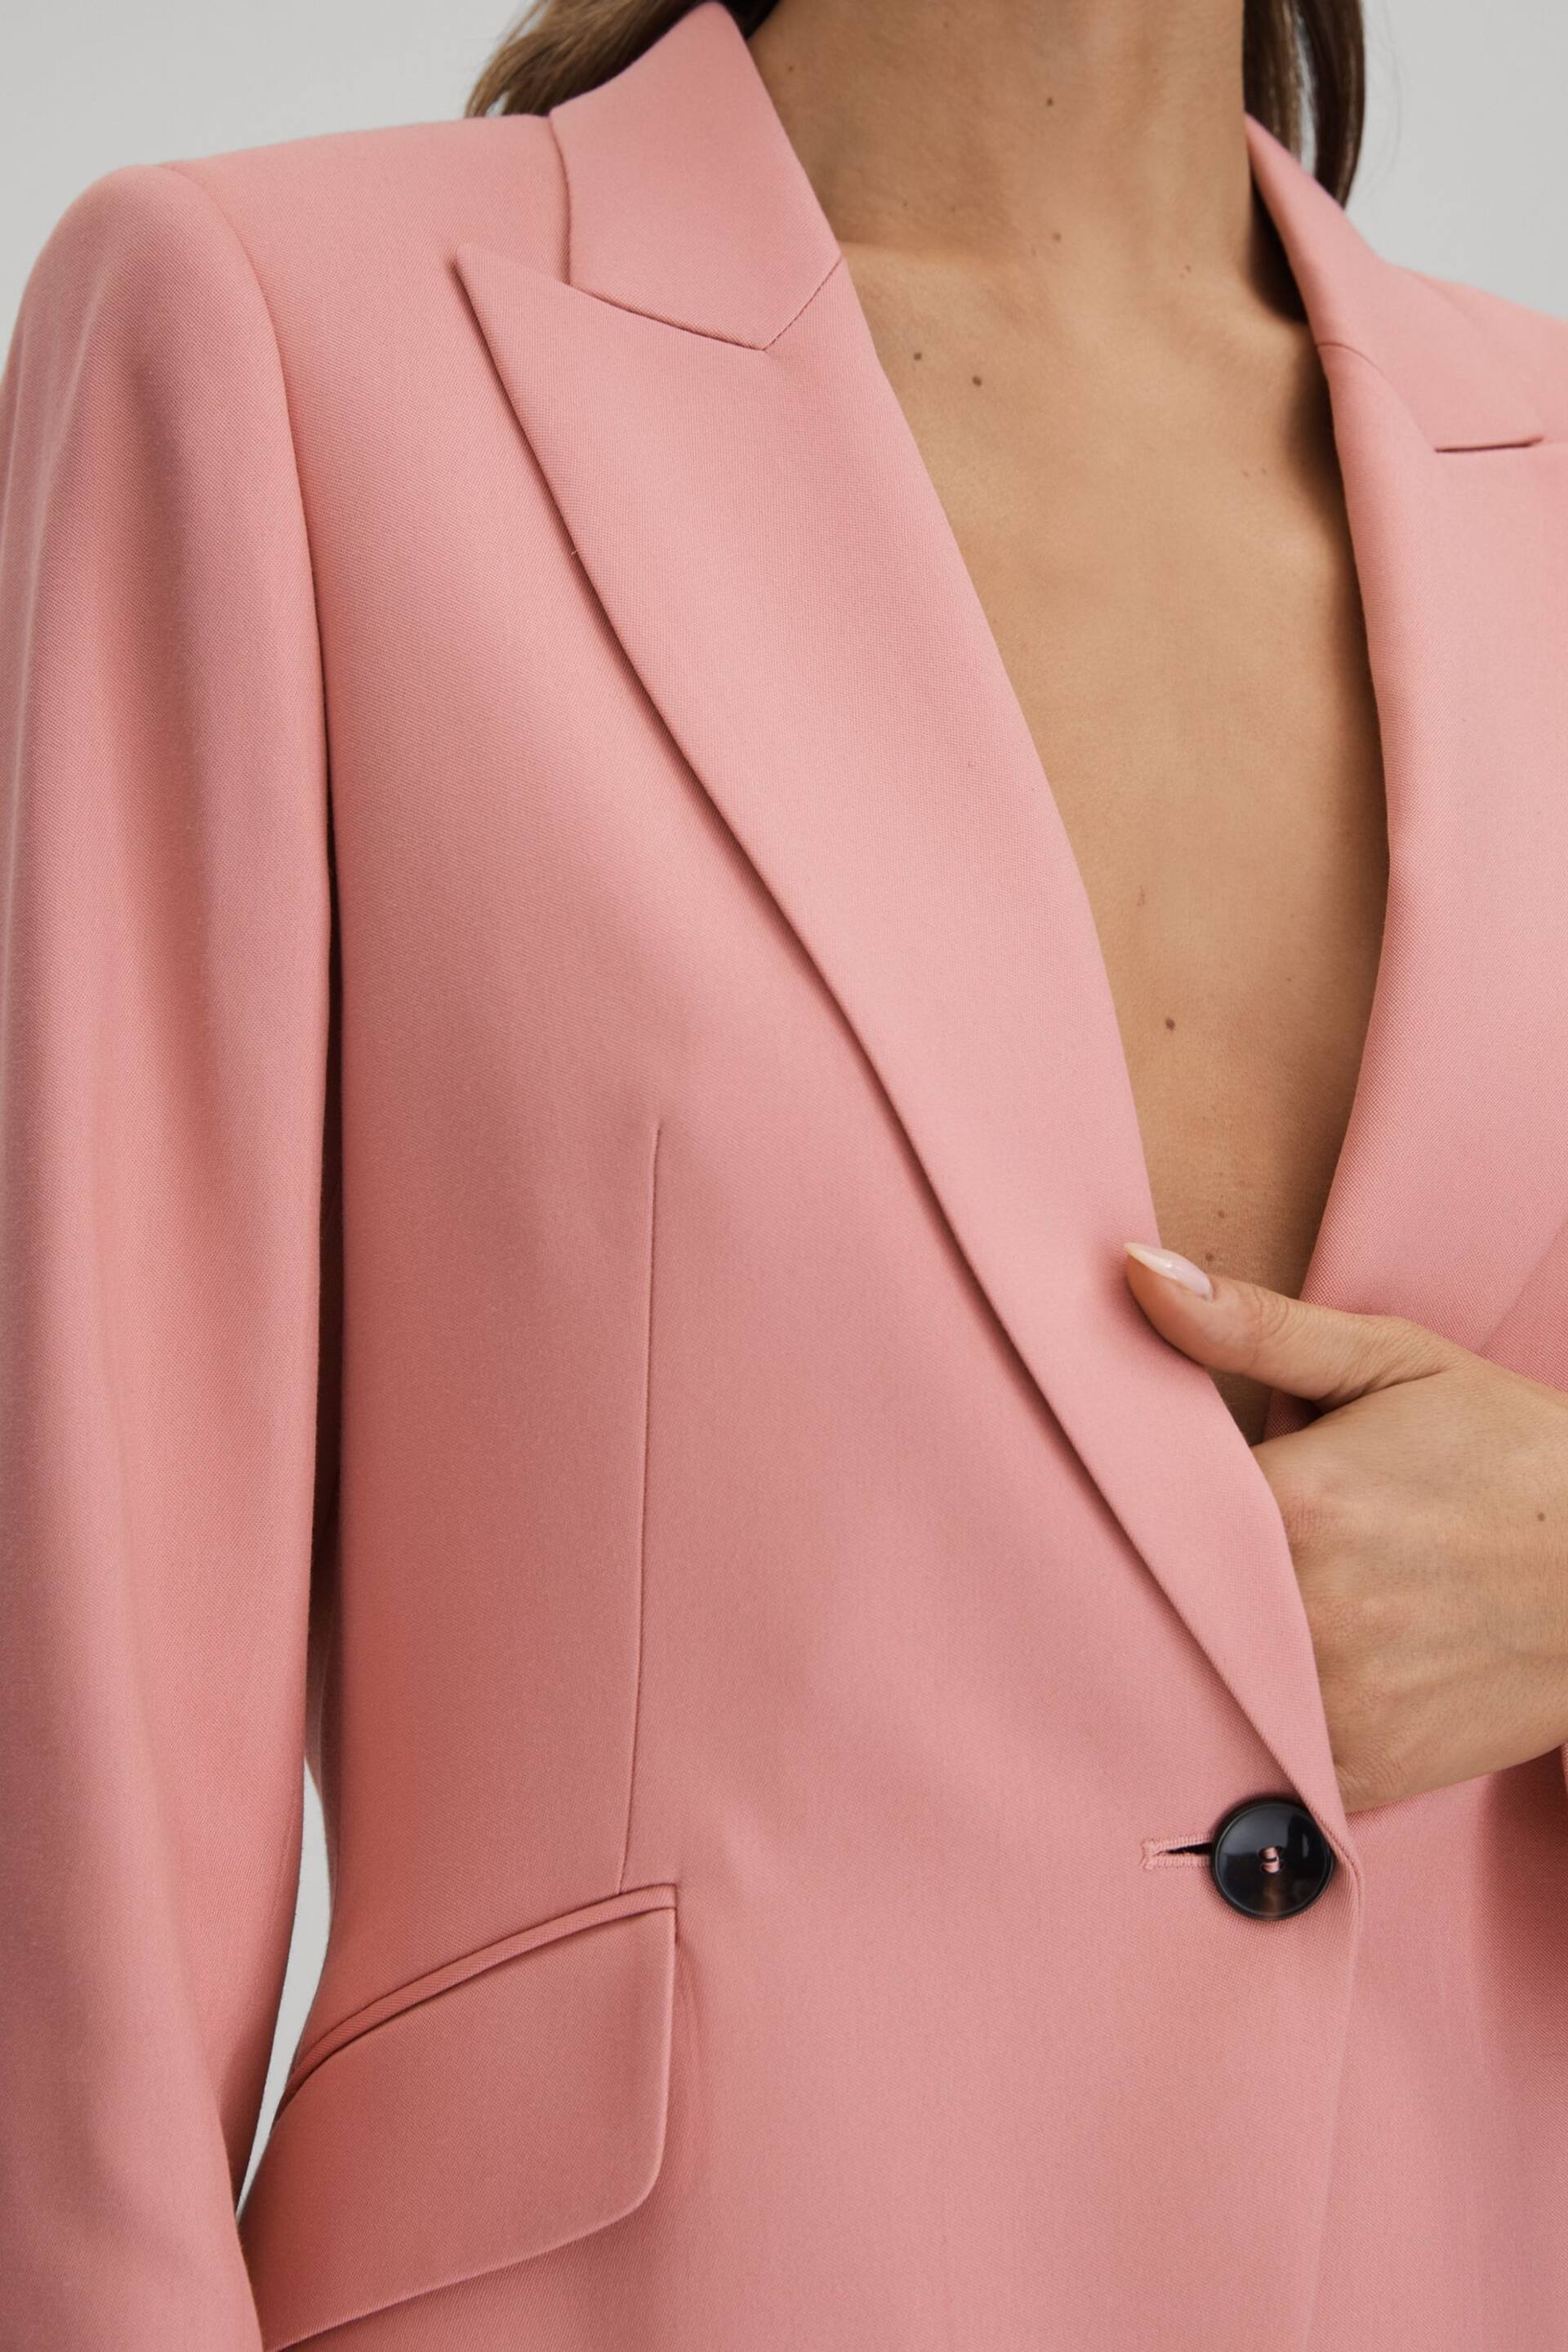 Reiss Pink Millie Tailored Single Breasted Suit Blazer - Image 4 of 7